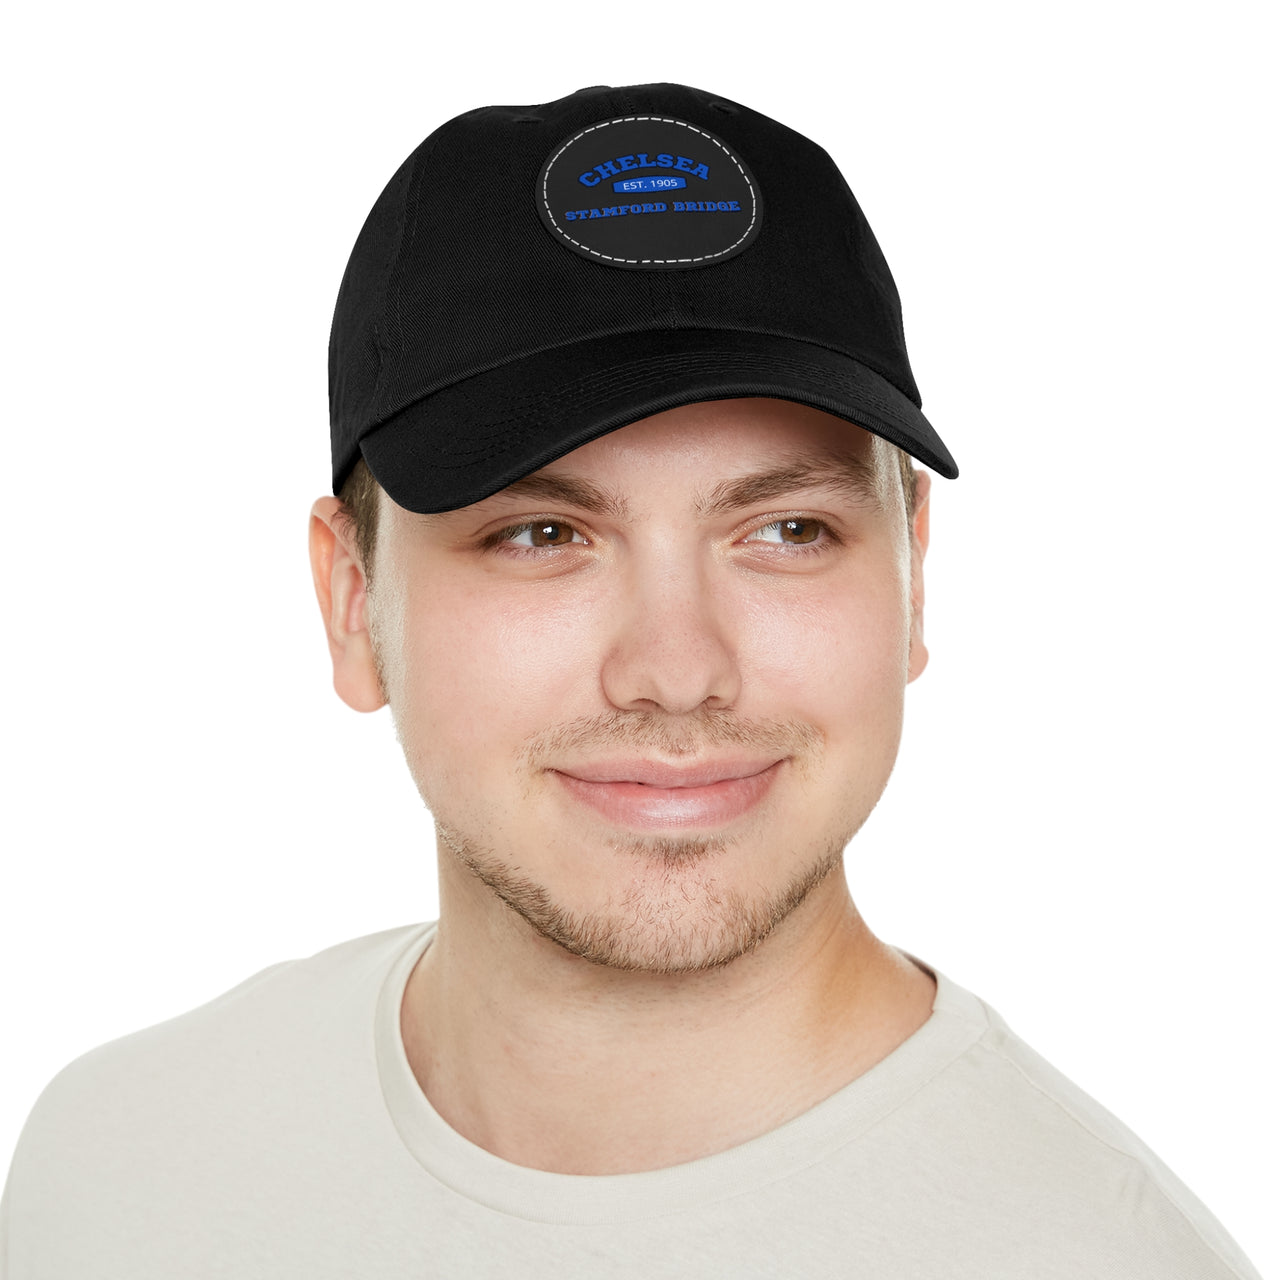 Chelsea Stamford Bridge Dad Hat with Leather Patch (Round)